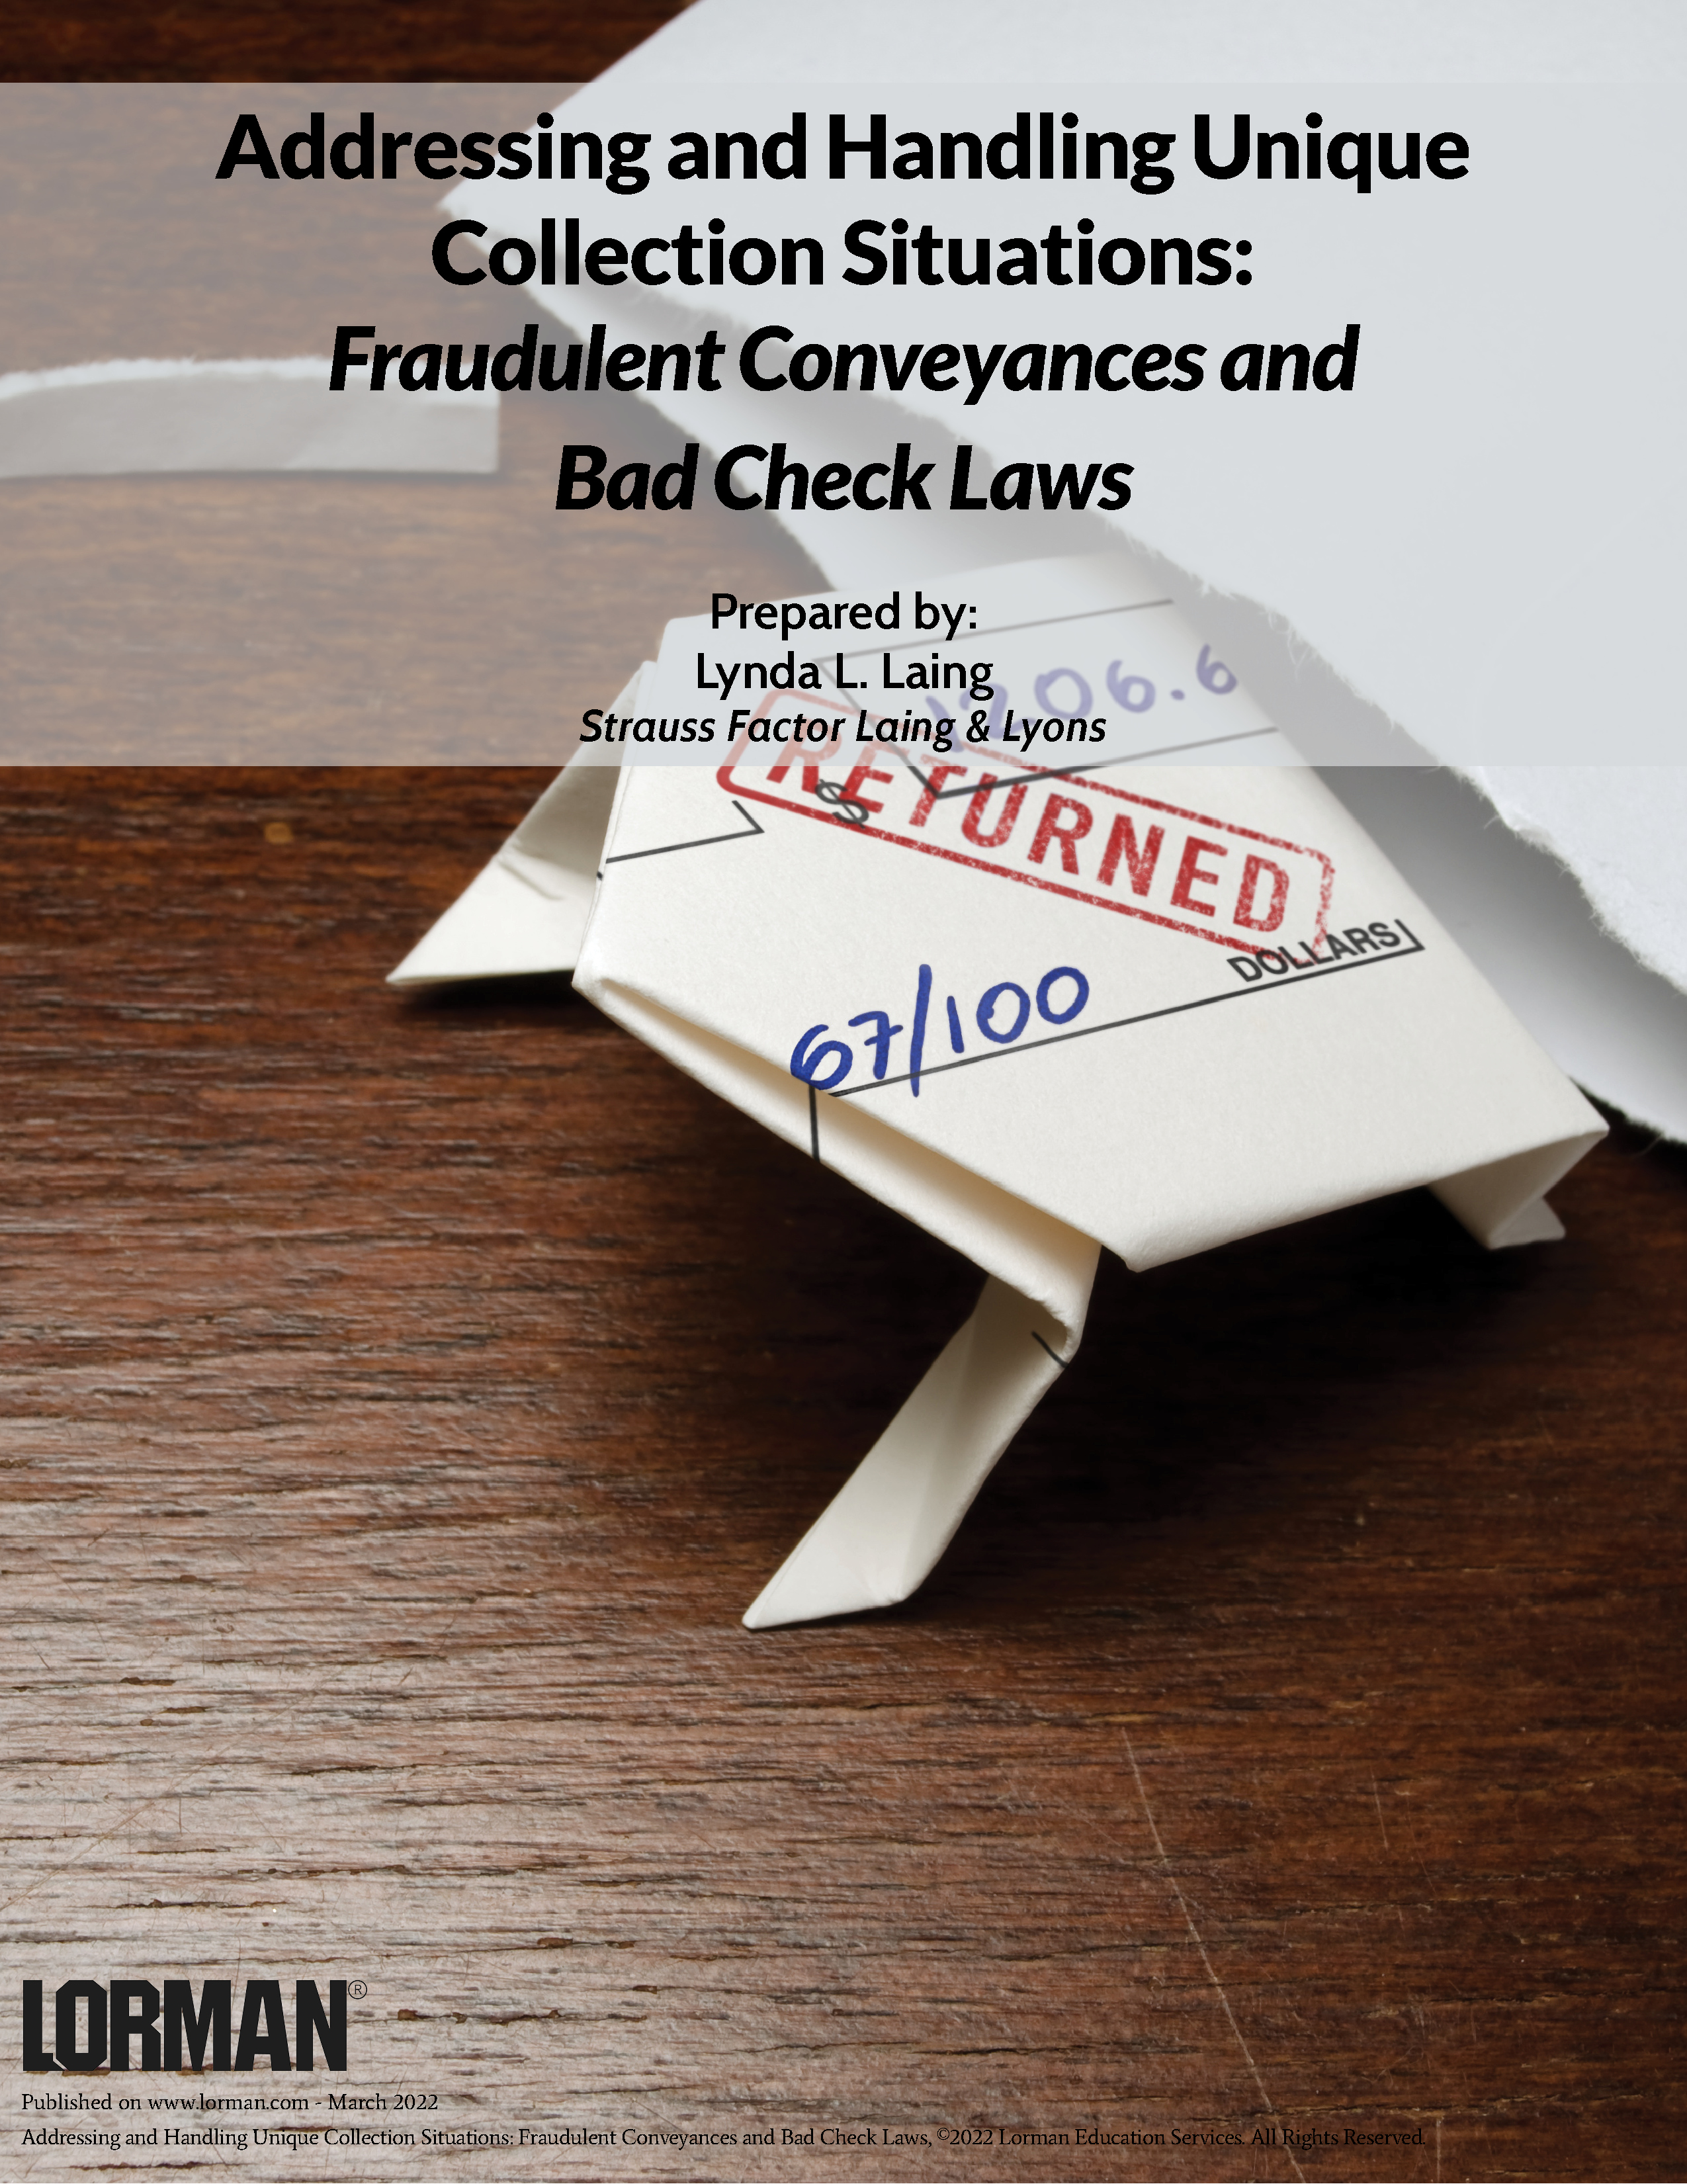 Addressing and Handling Unique Collection Situations: Fraudulent Conveyances and Bad Check Laws